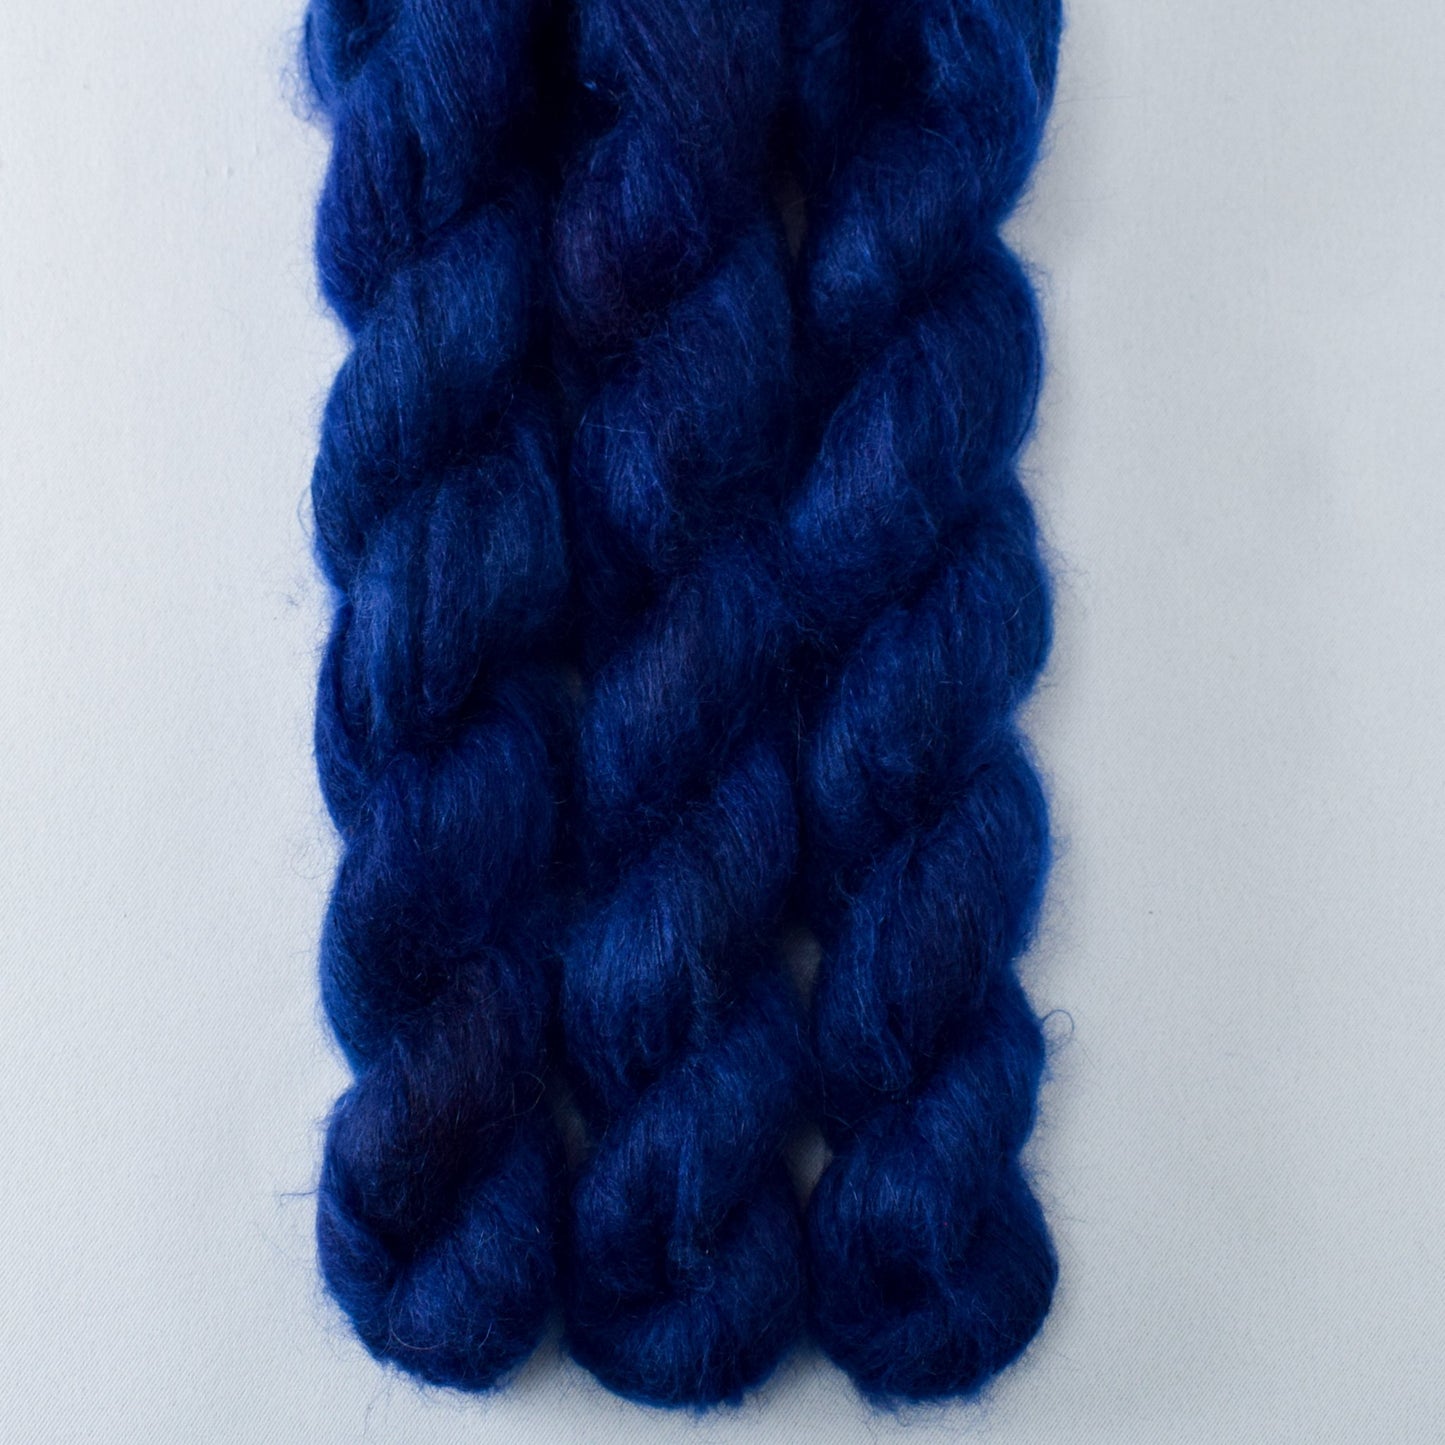 McHales - Miss Babs Moonglow yarn